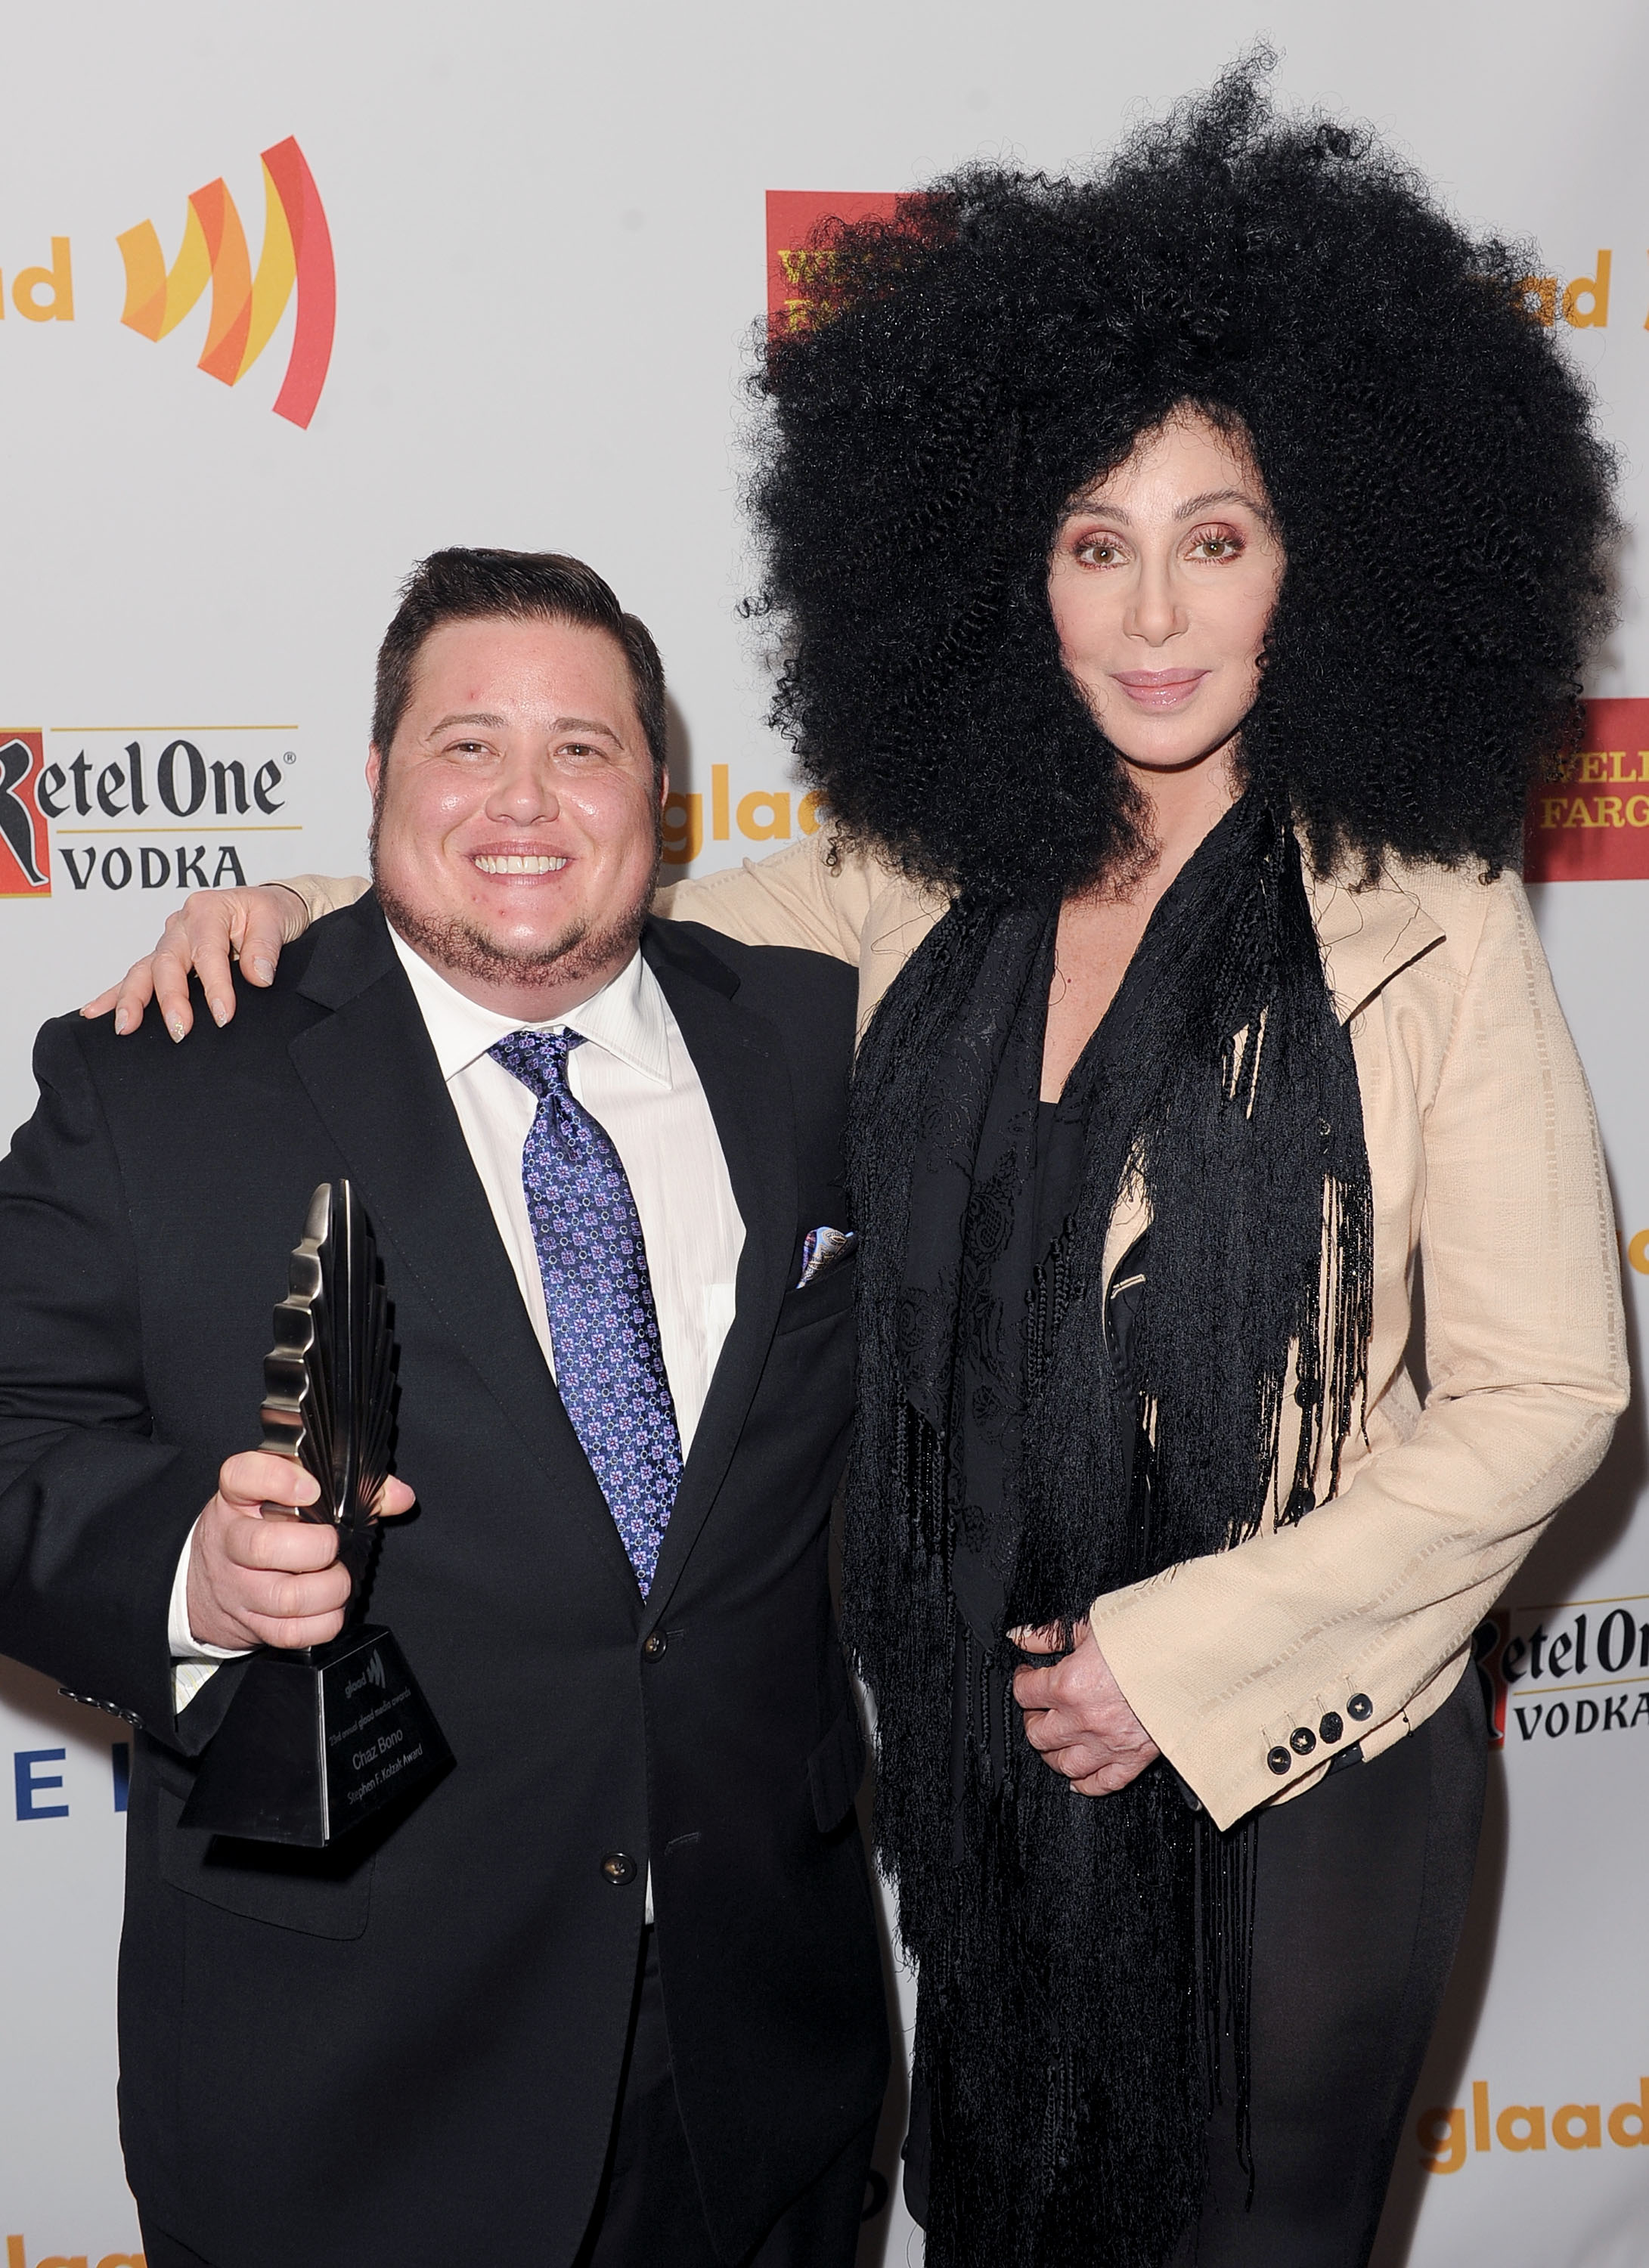 Chaz Bono and Cher at the 23rd Annual GLAAD Media Awards in Los Angeles, California, on April 21, 2012. | Source: Getty Images